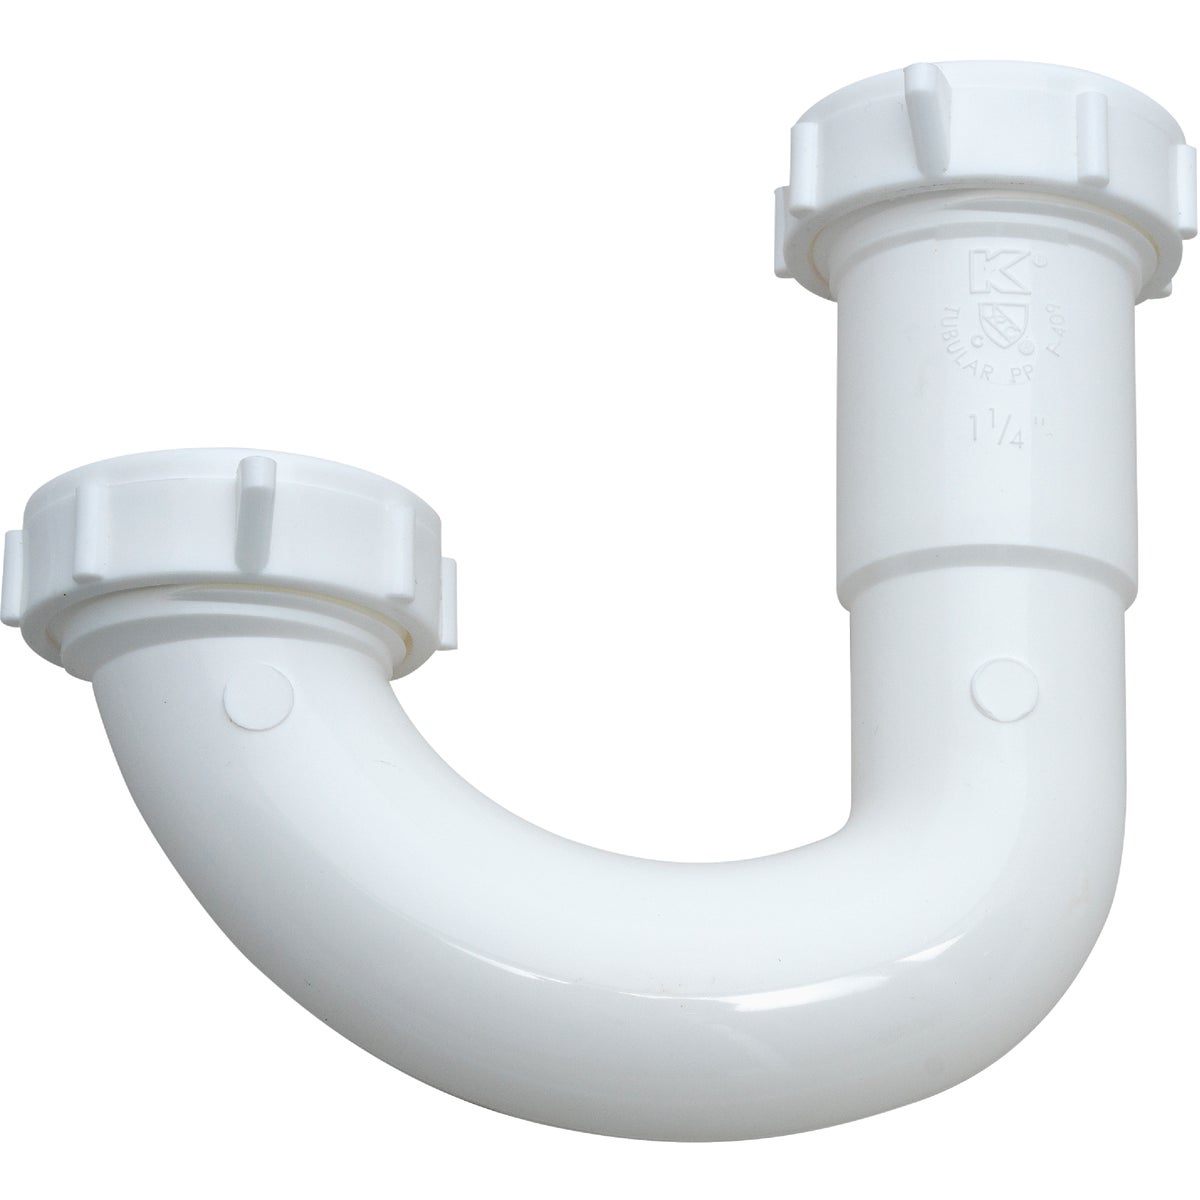 Item 444510, Plastic J-Bend is made using durable polypropylene plastic and is ideal for